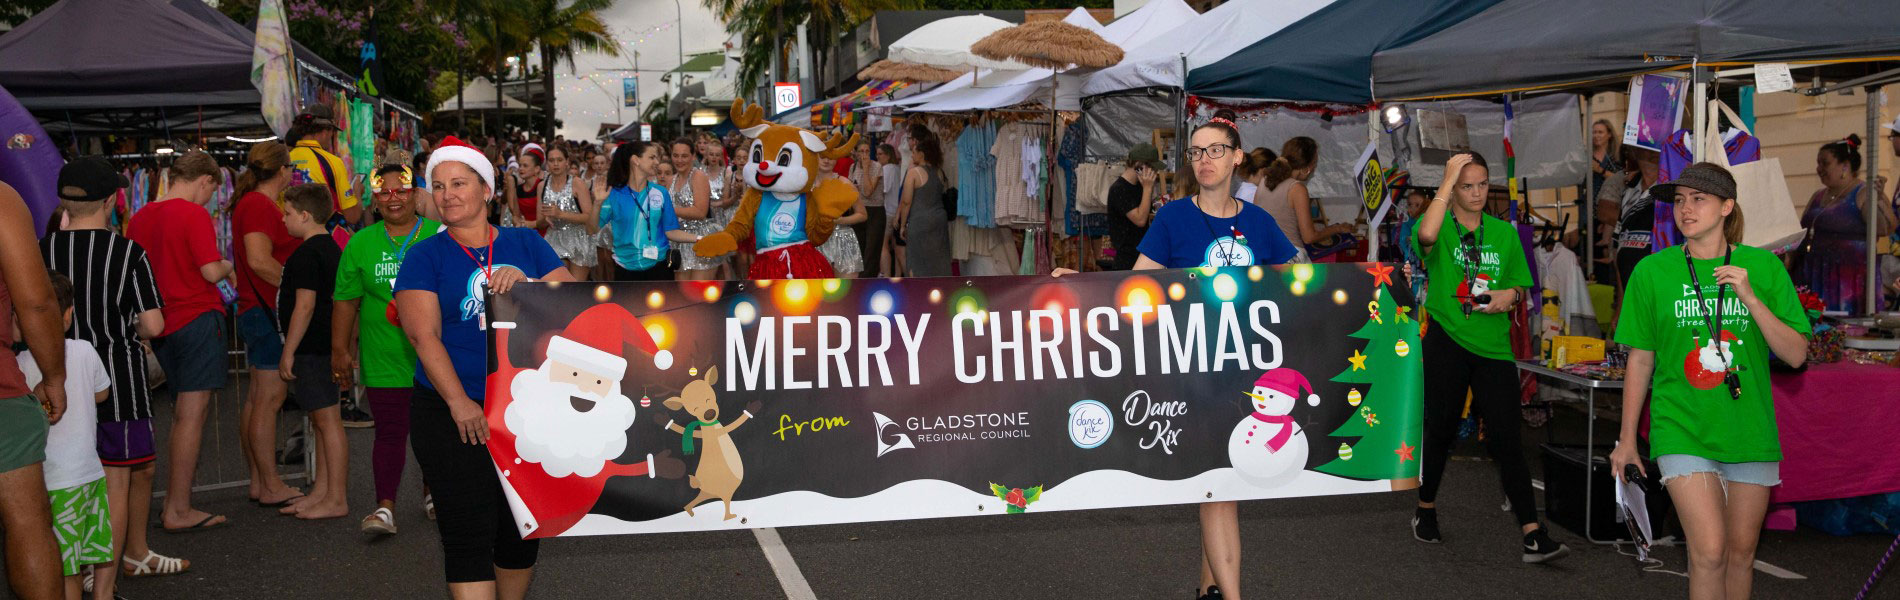 Grc christmas street party banner 1